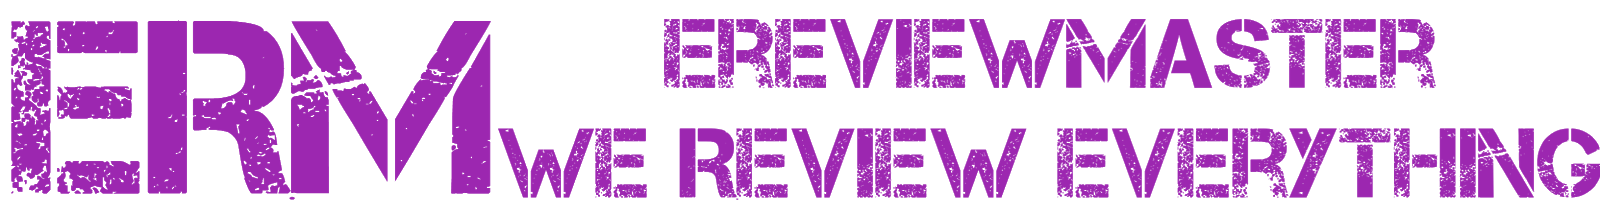 Best Review Site- eReviewMaster